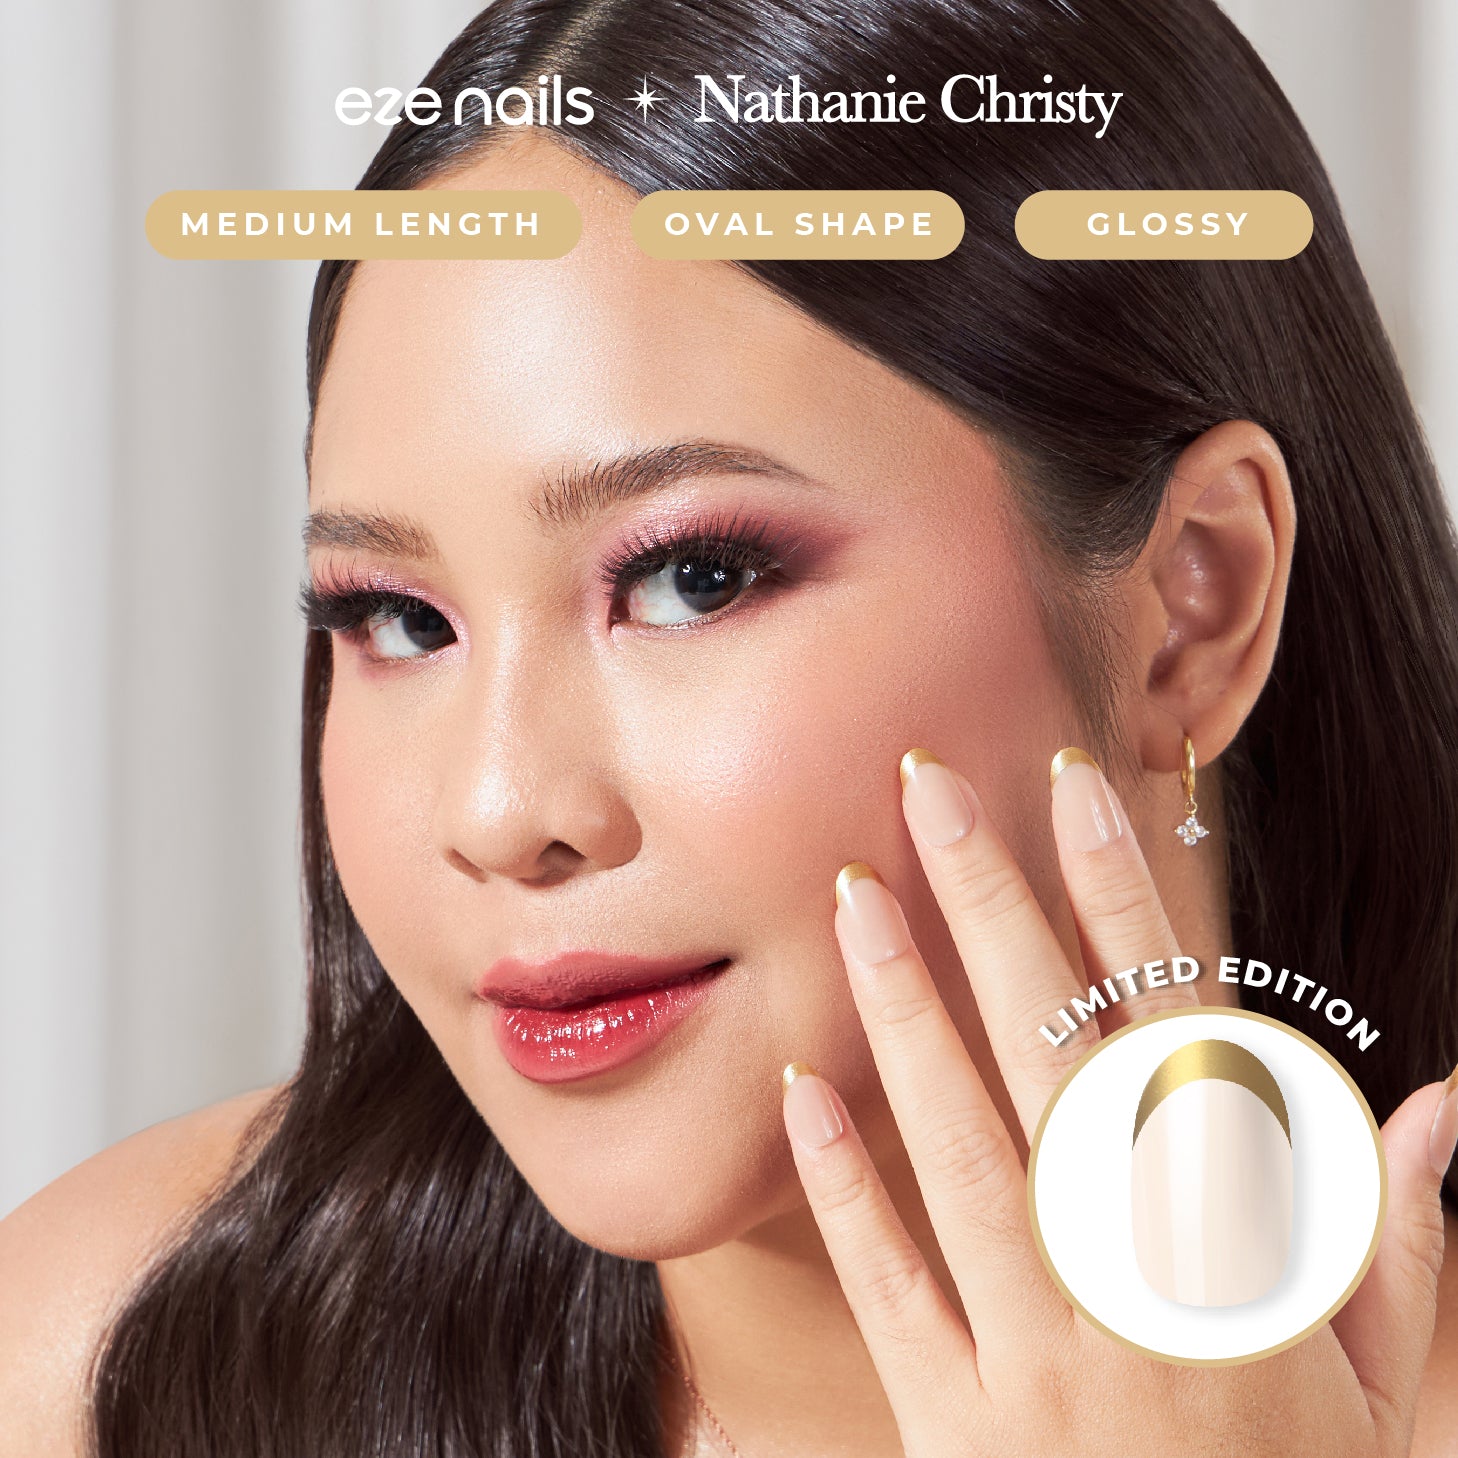 (NEW) Eze Nails x Nathanie Christy - Magnetic in Gold Spot on Manicure (Kuku Tempel Tangan)